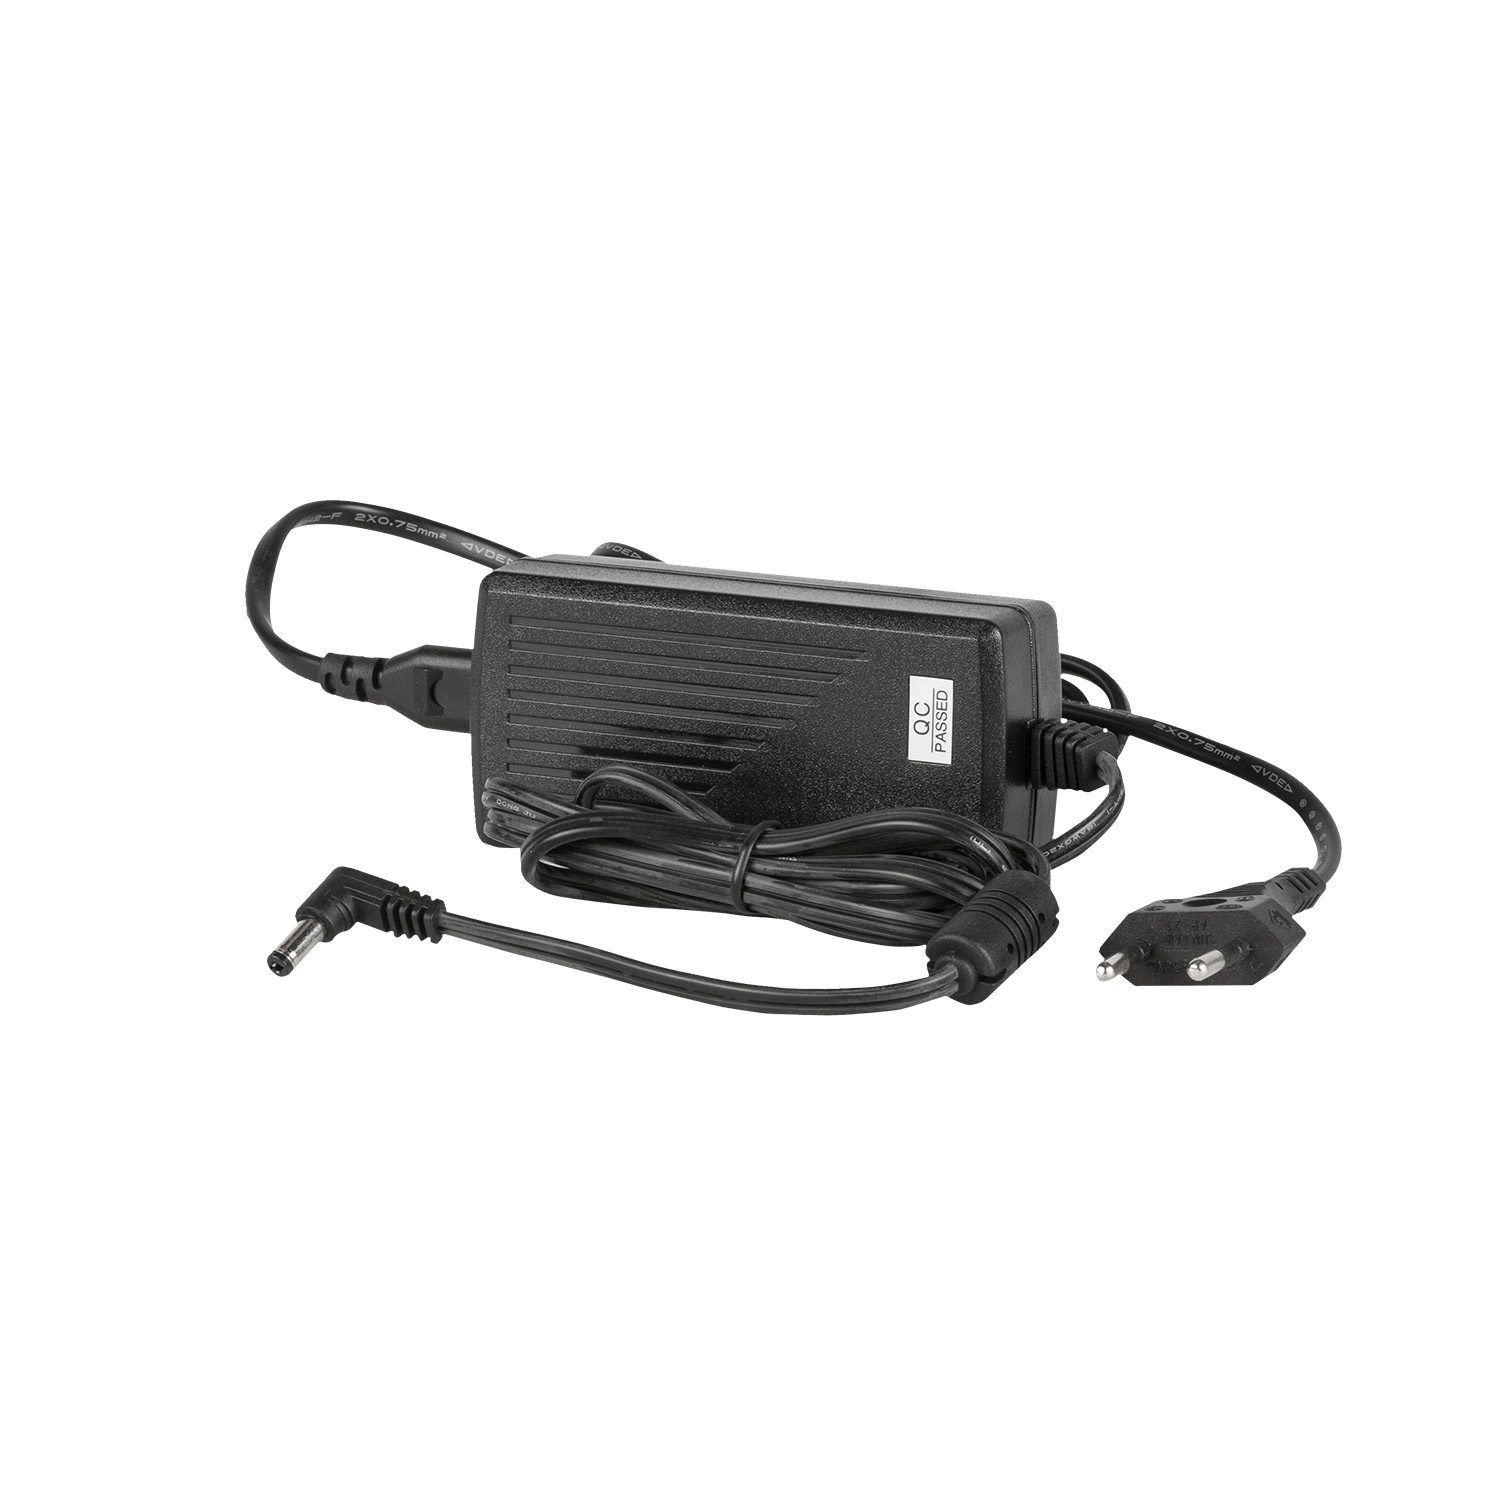 12 volt amp AC Adapter for Europe